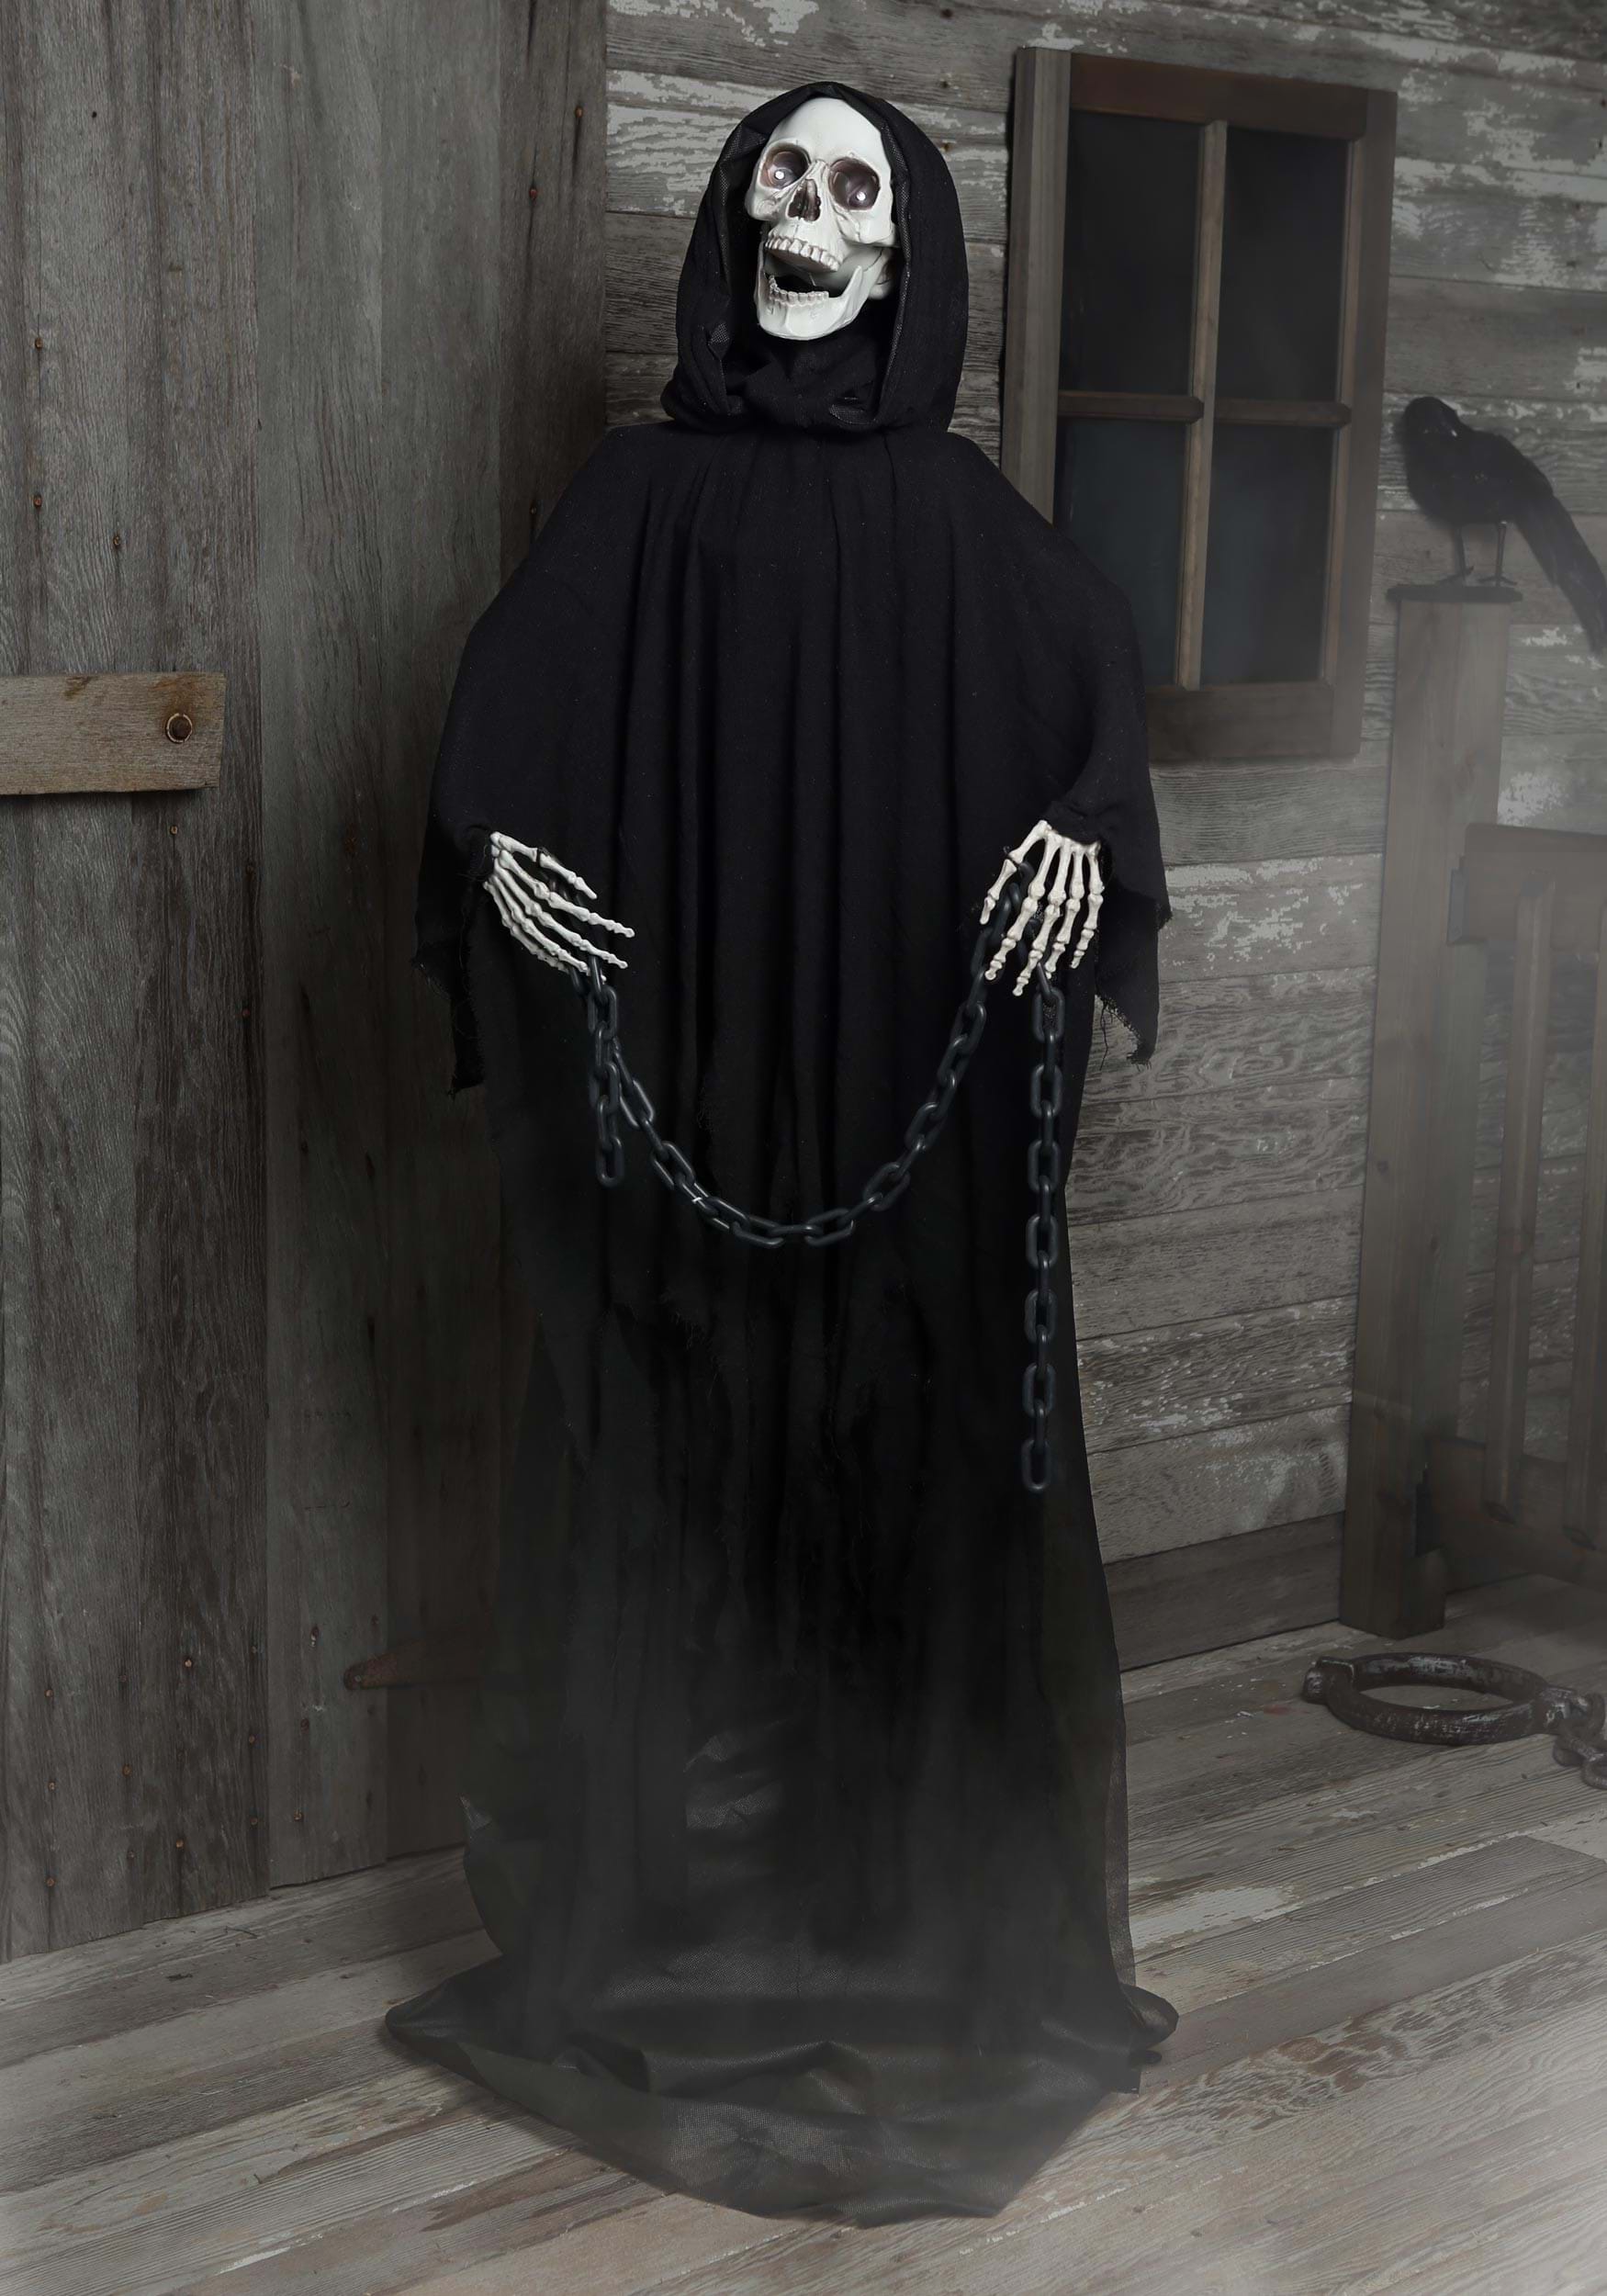 Animated Reaper Scary Halloween Decoration 6'  New Old Stock    M3842